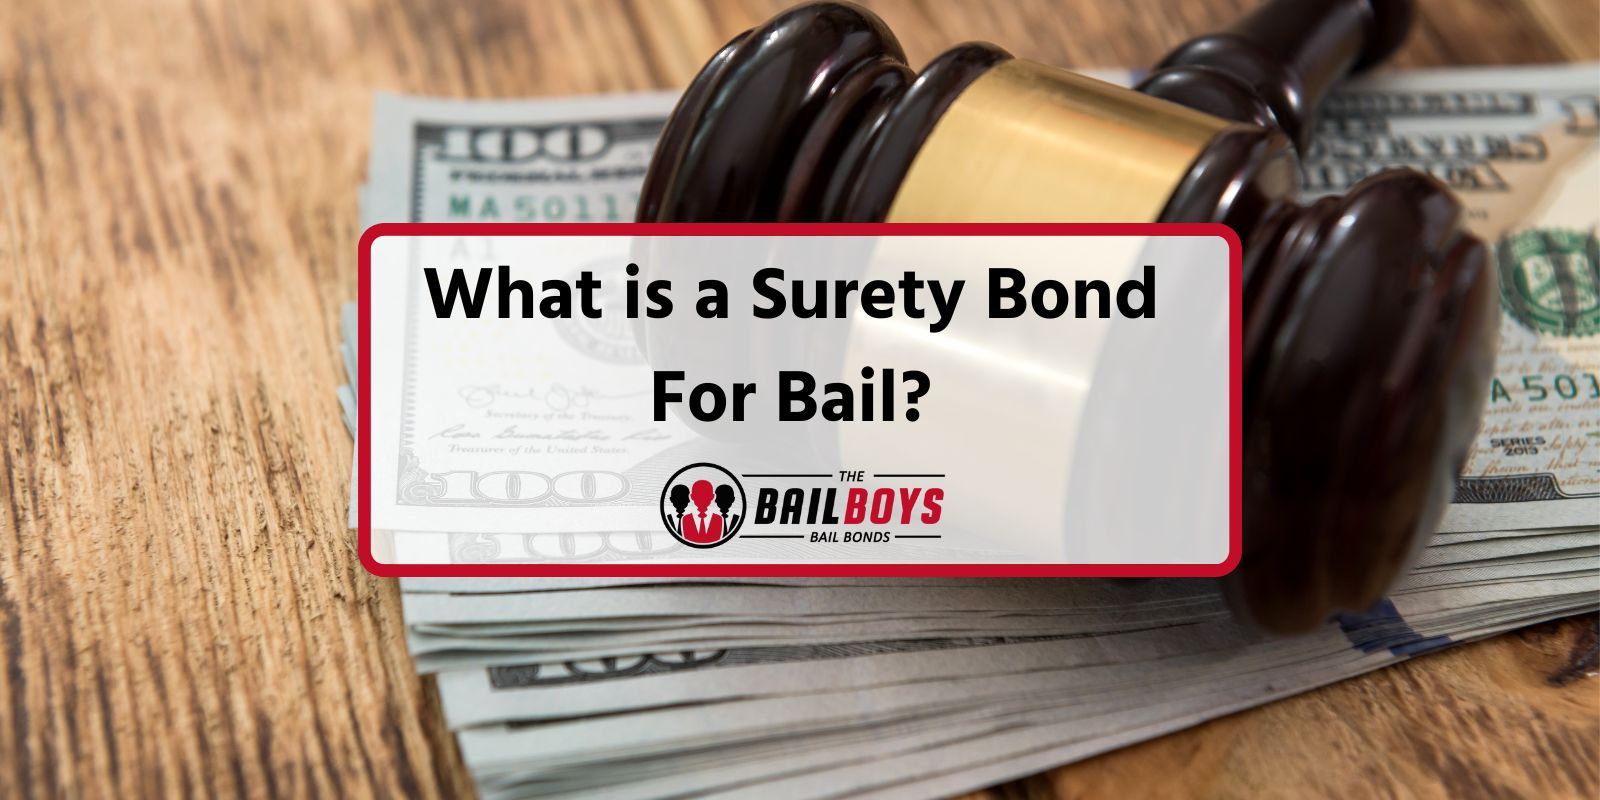 What is a Surety Bond for Bail?